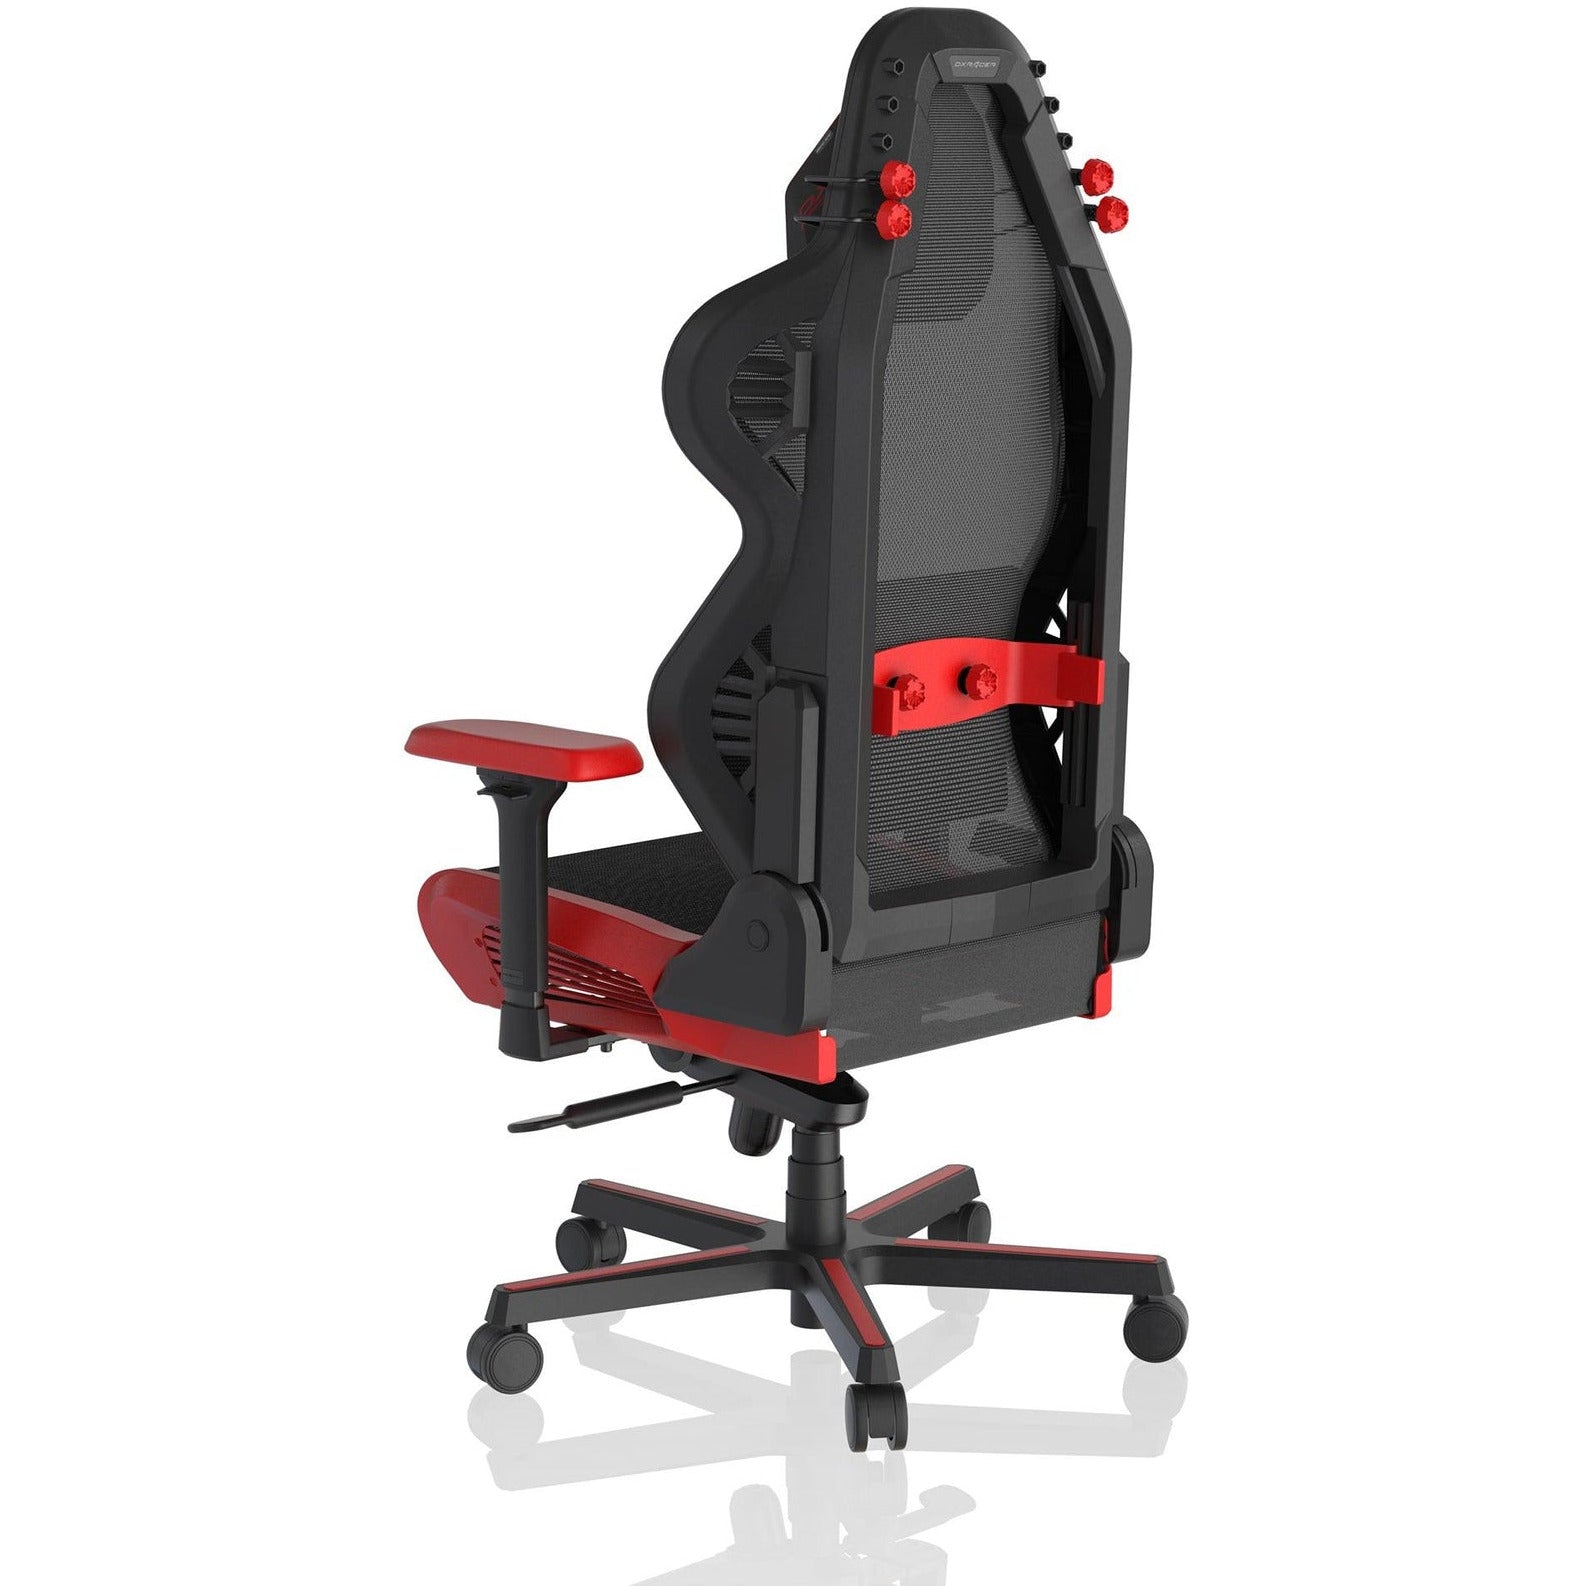 DXRacer Air Pro Mesh Red and Black Gaming Chair